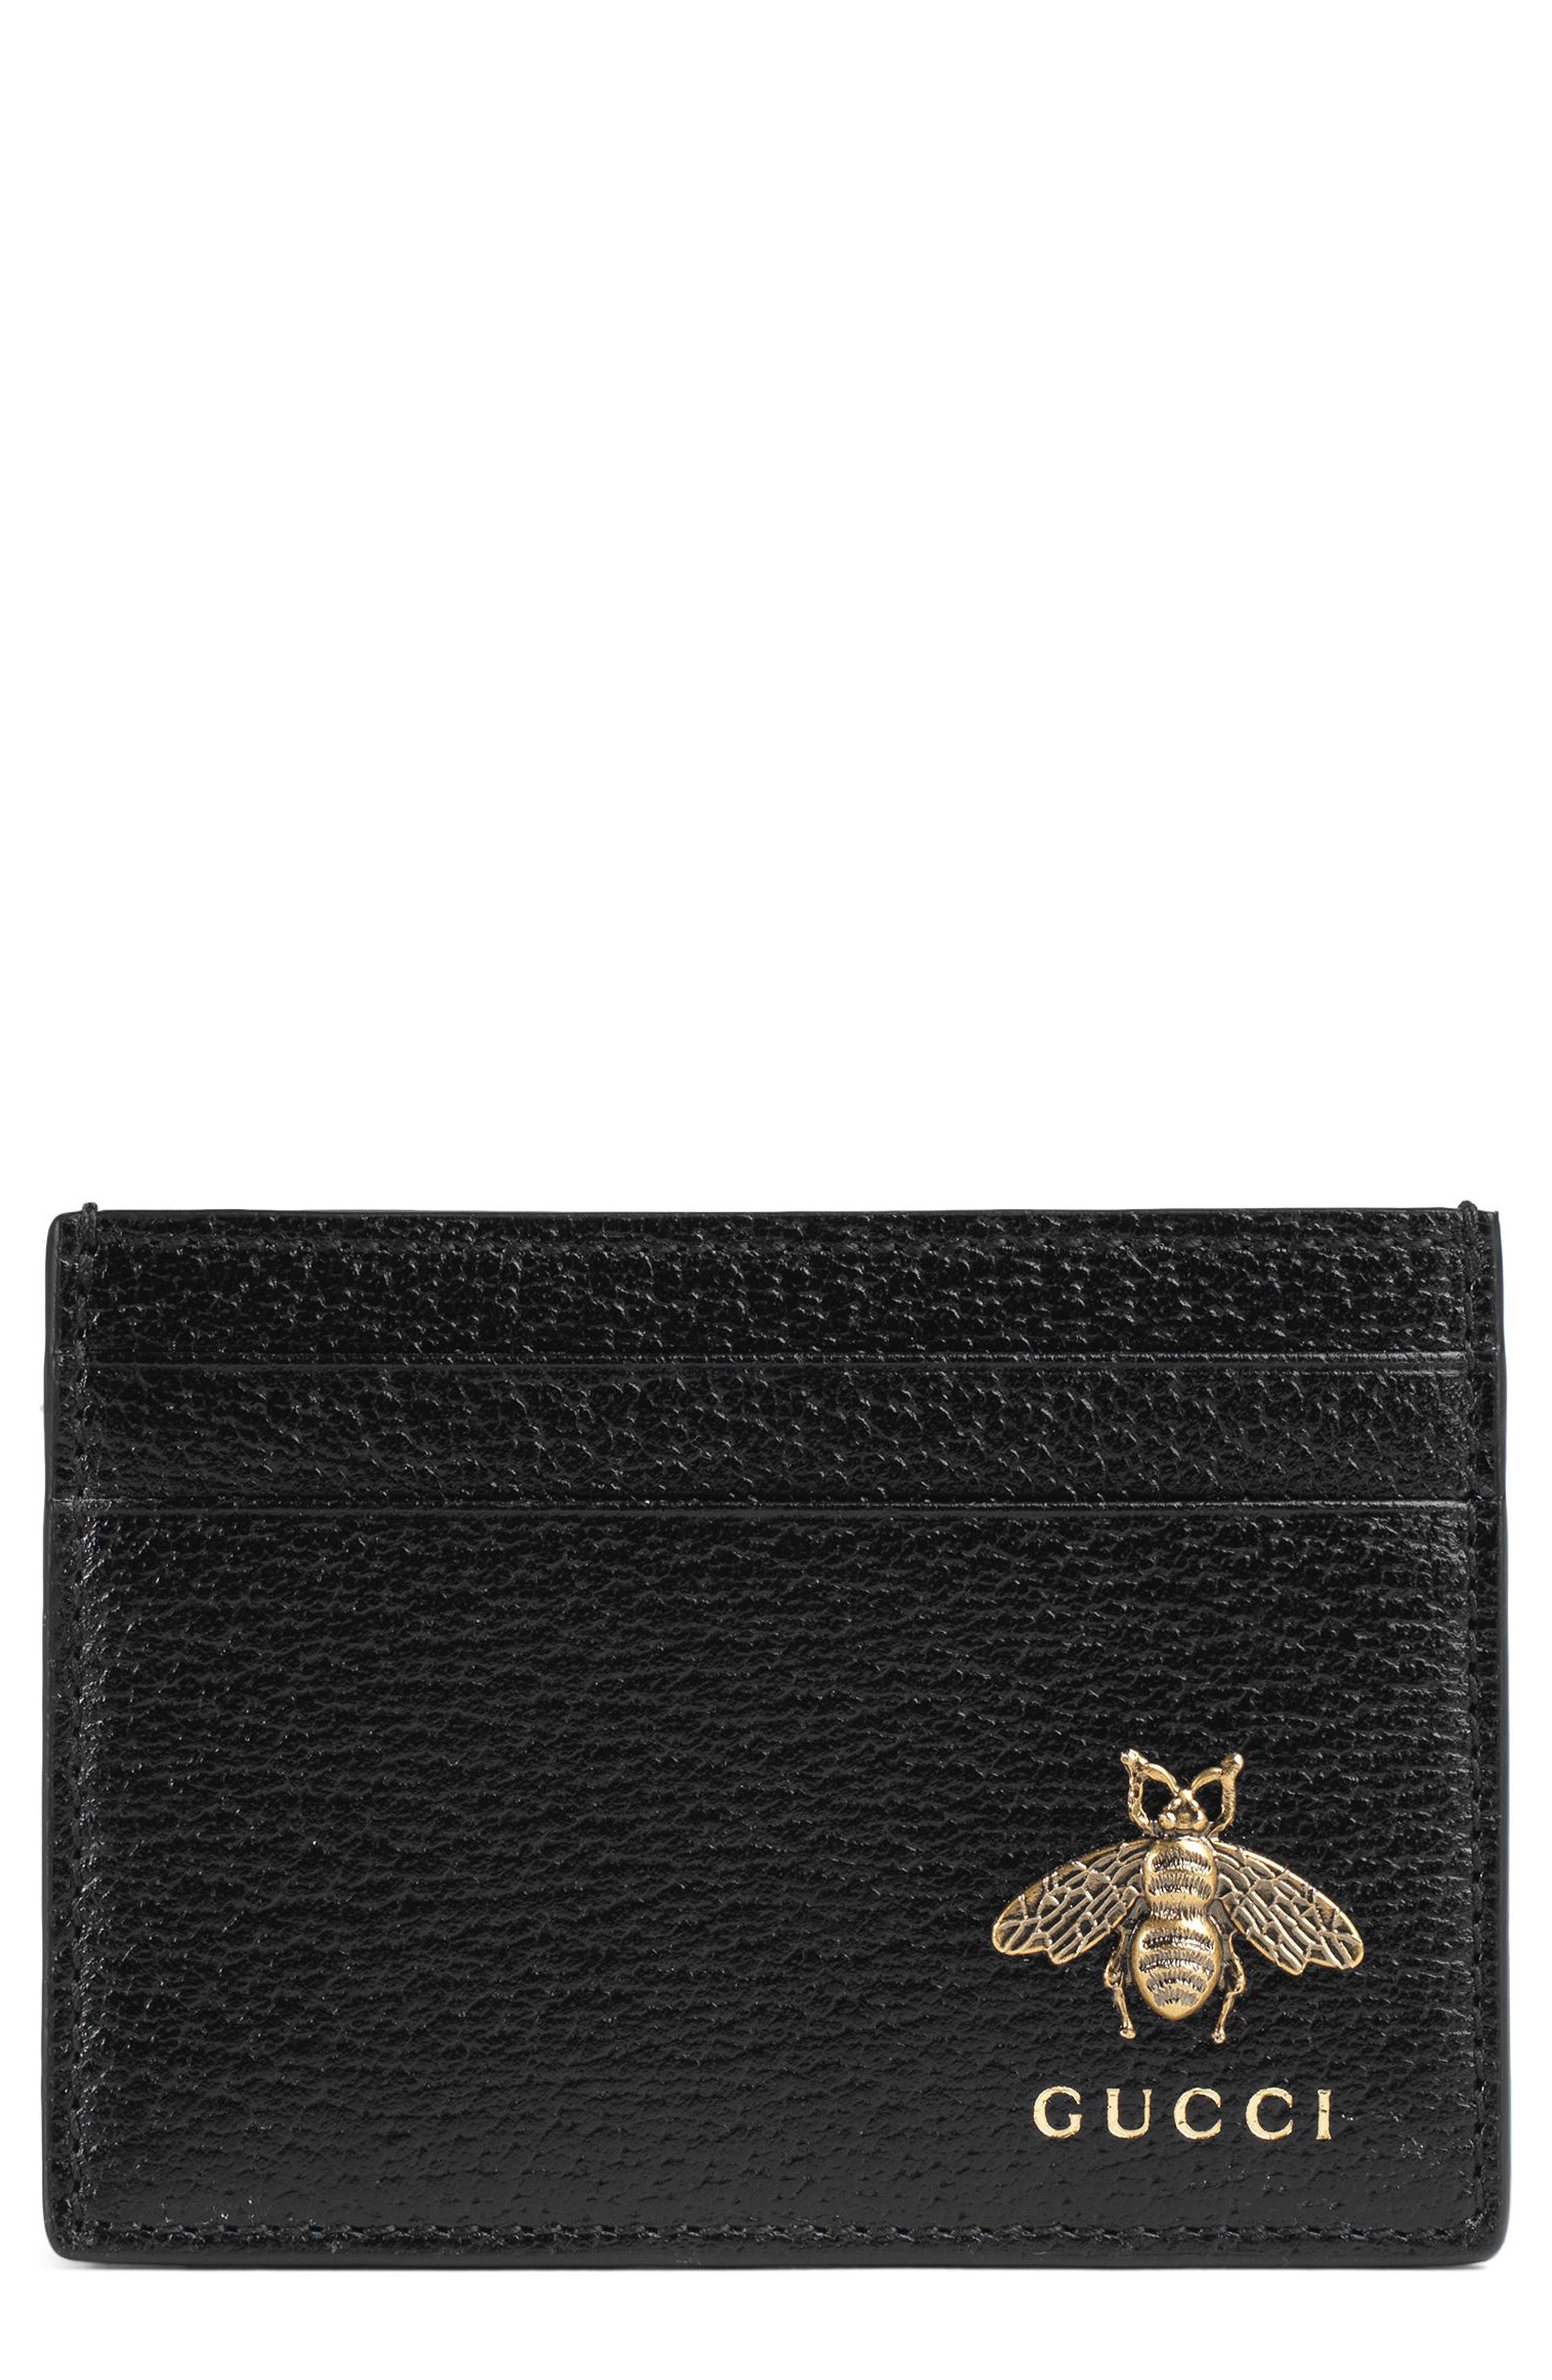 gucci bee card case